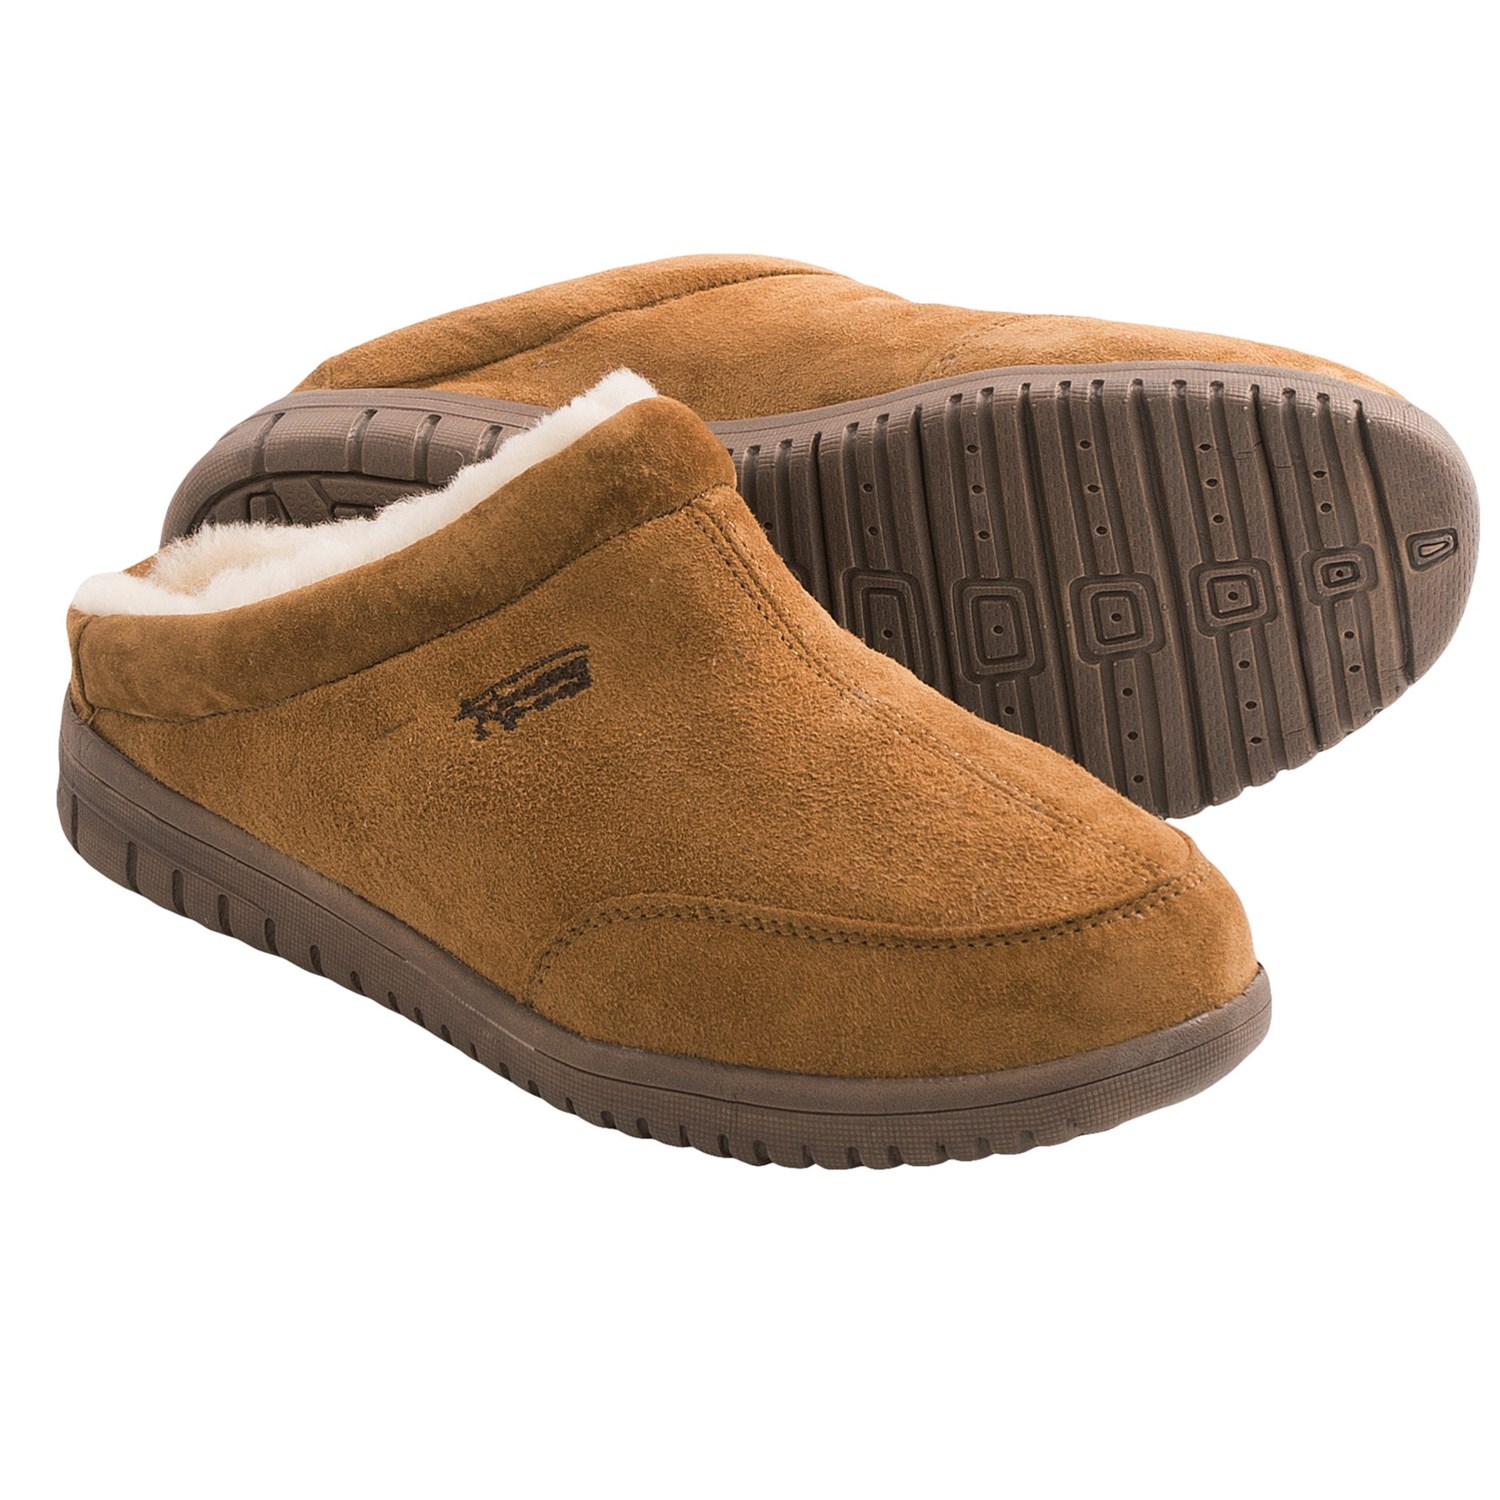 Aussie Dogs Aussie Slide Slippers - Shearling Lining (For Men and Women ...